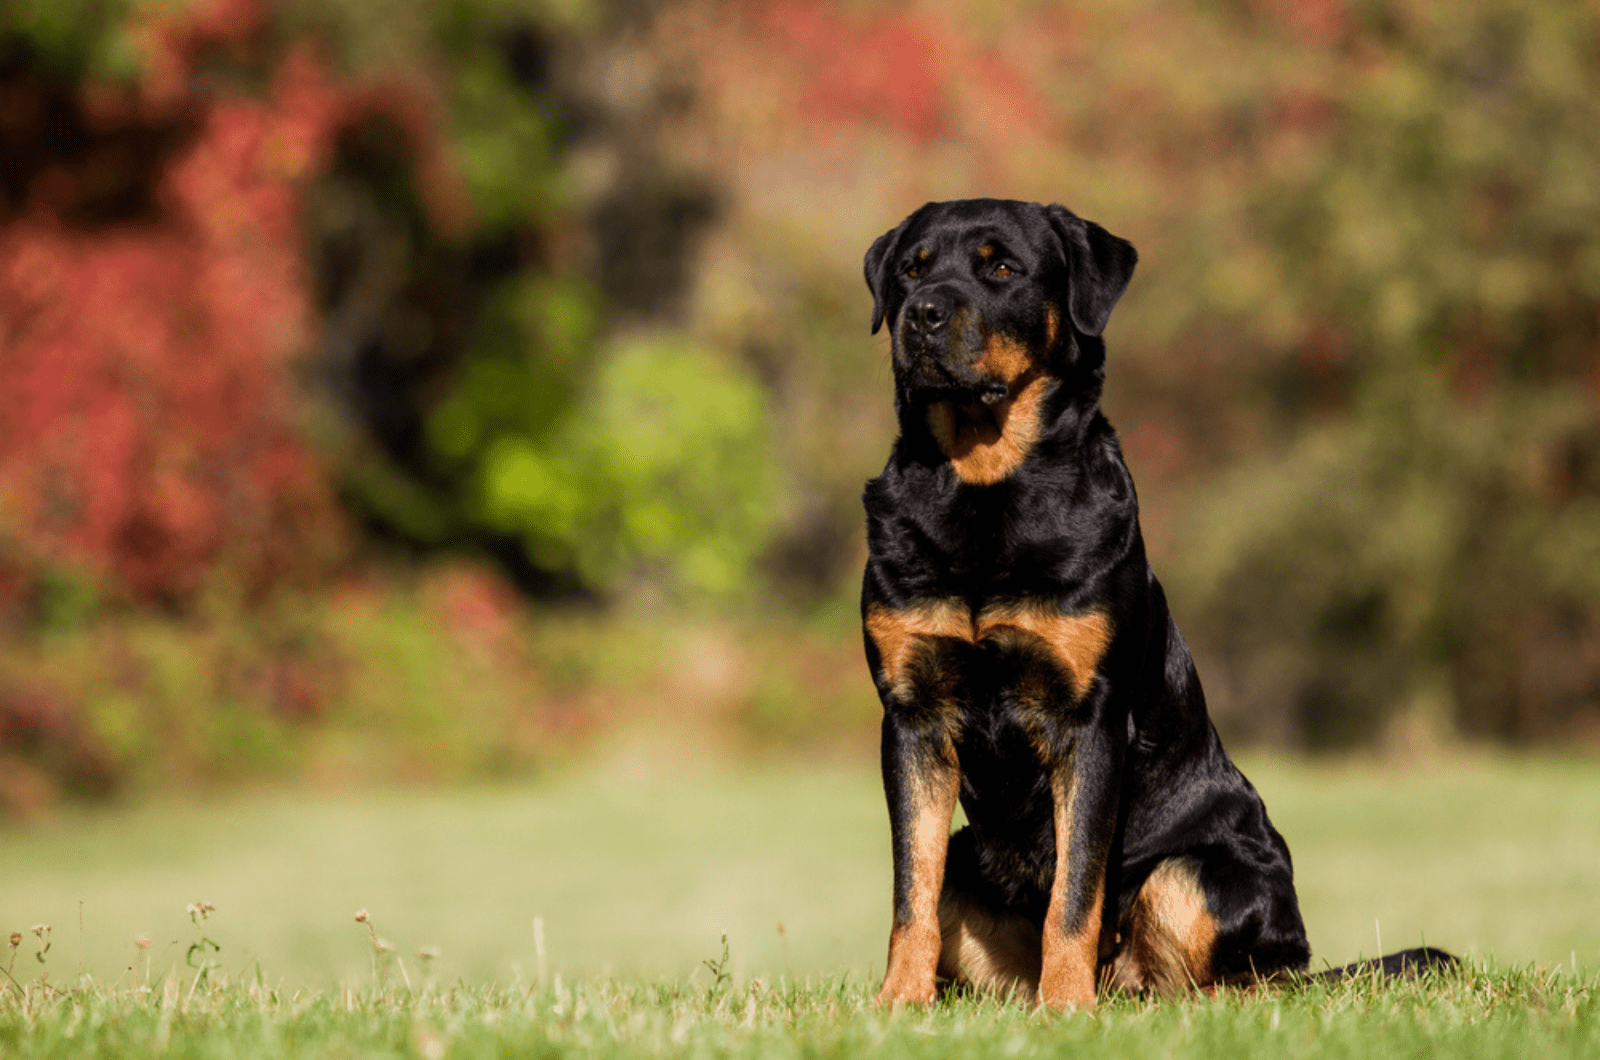 21 Fun Facts About Rottweilers That Will Make You Go Wow